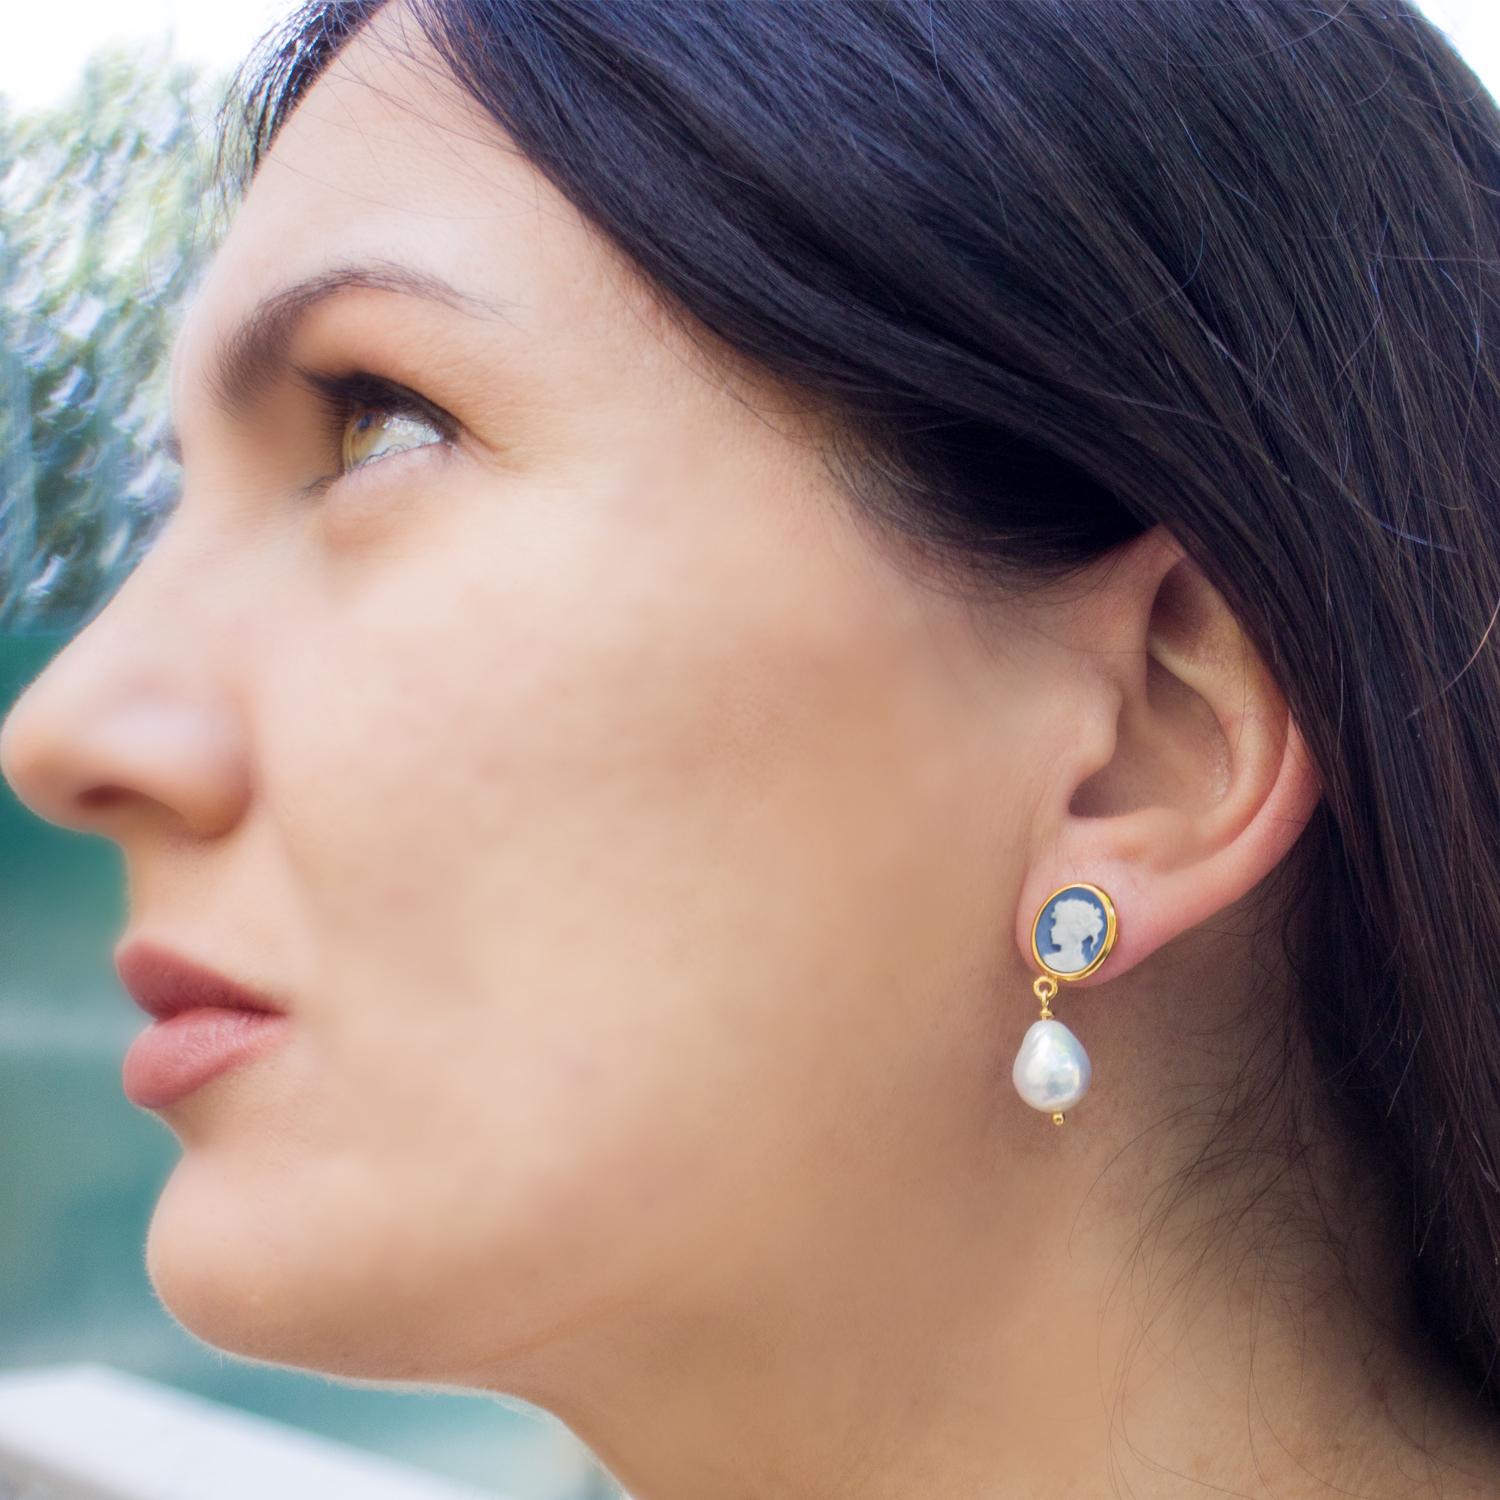 The Sky Blue Mini Cameo and Pearl Drop earrings by Vintouch are individually hand-crafted in Torre del Greco, Italy - the homeland of cameo jewelry art. There it is said that cameo carvers were used to depict the image of the women they loved when